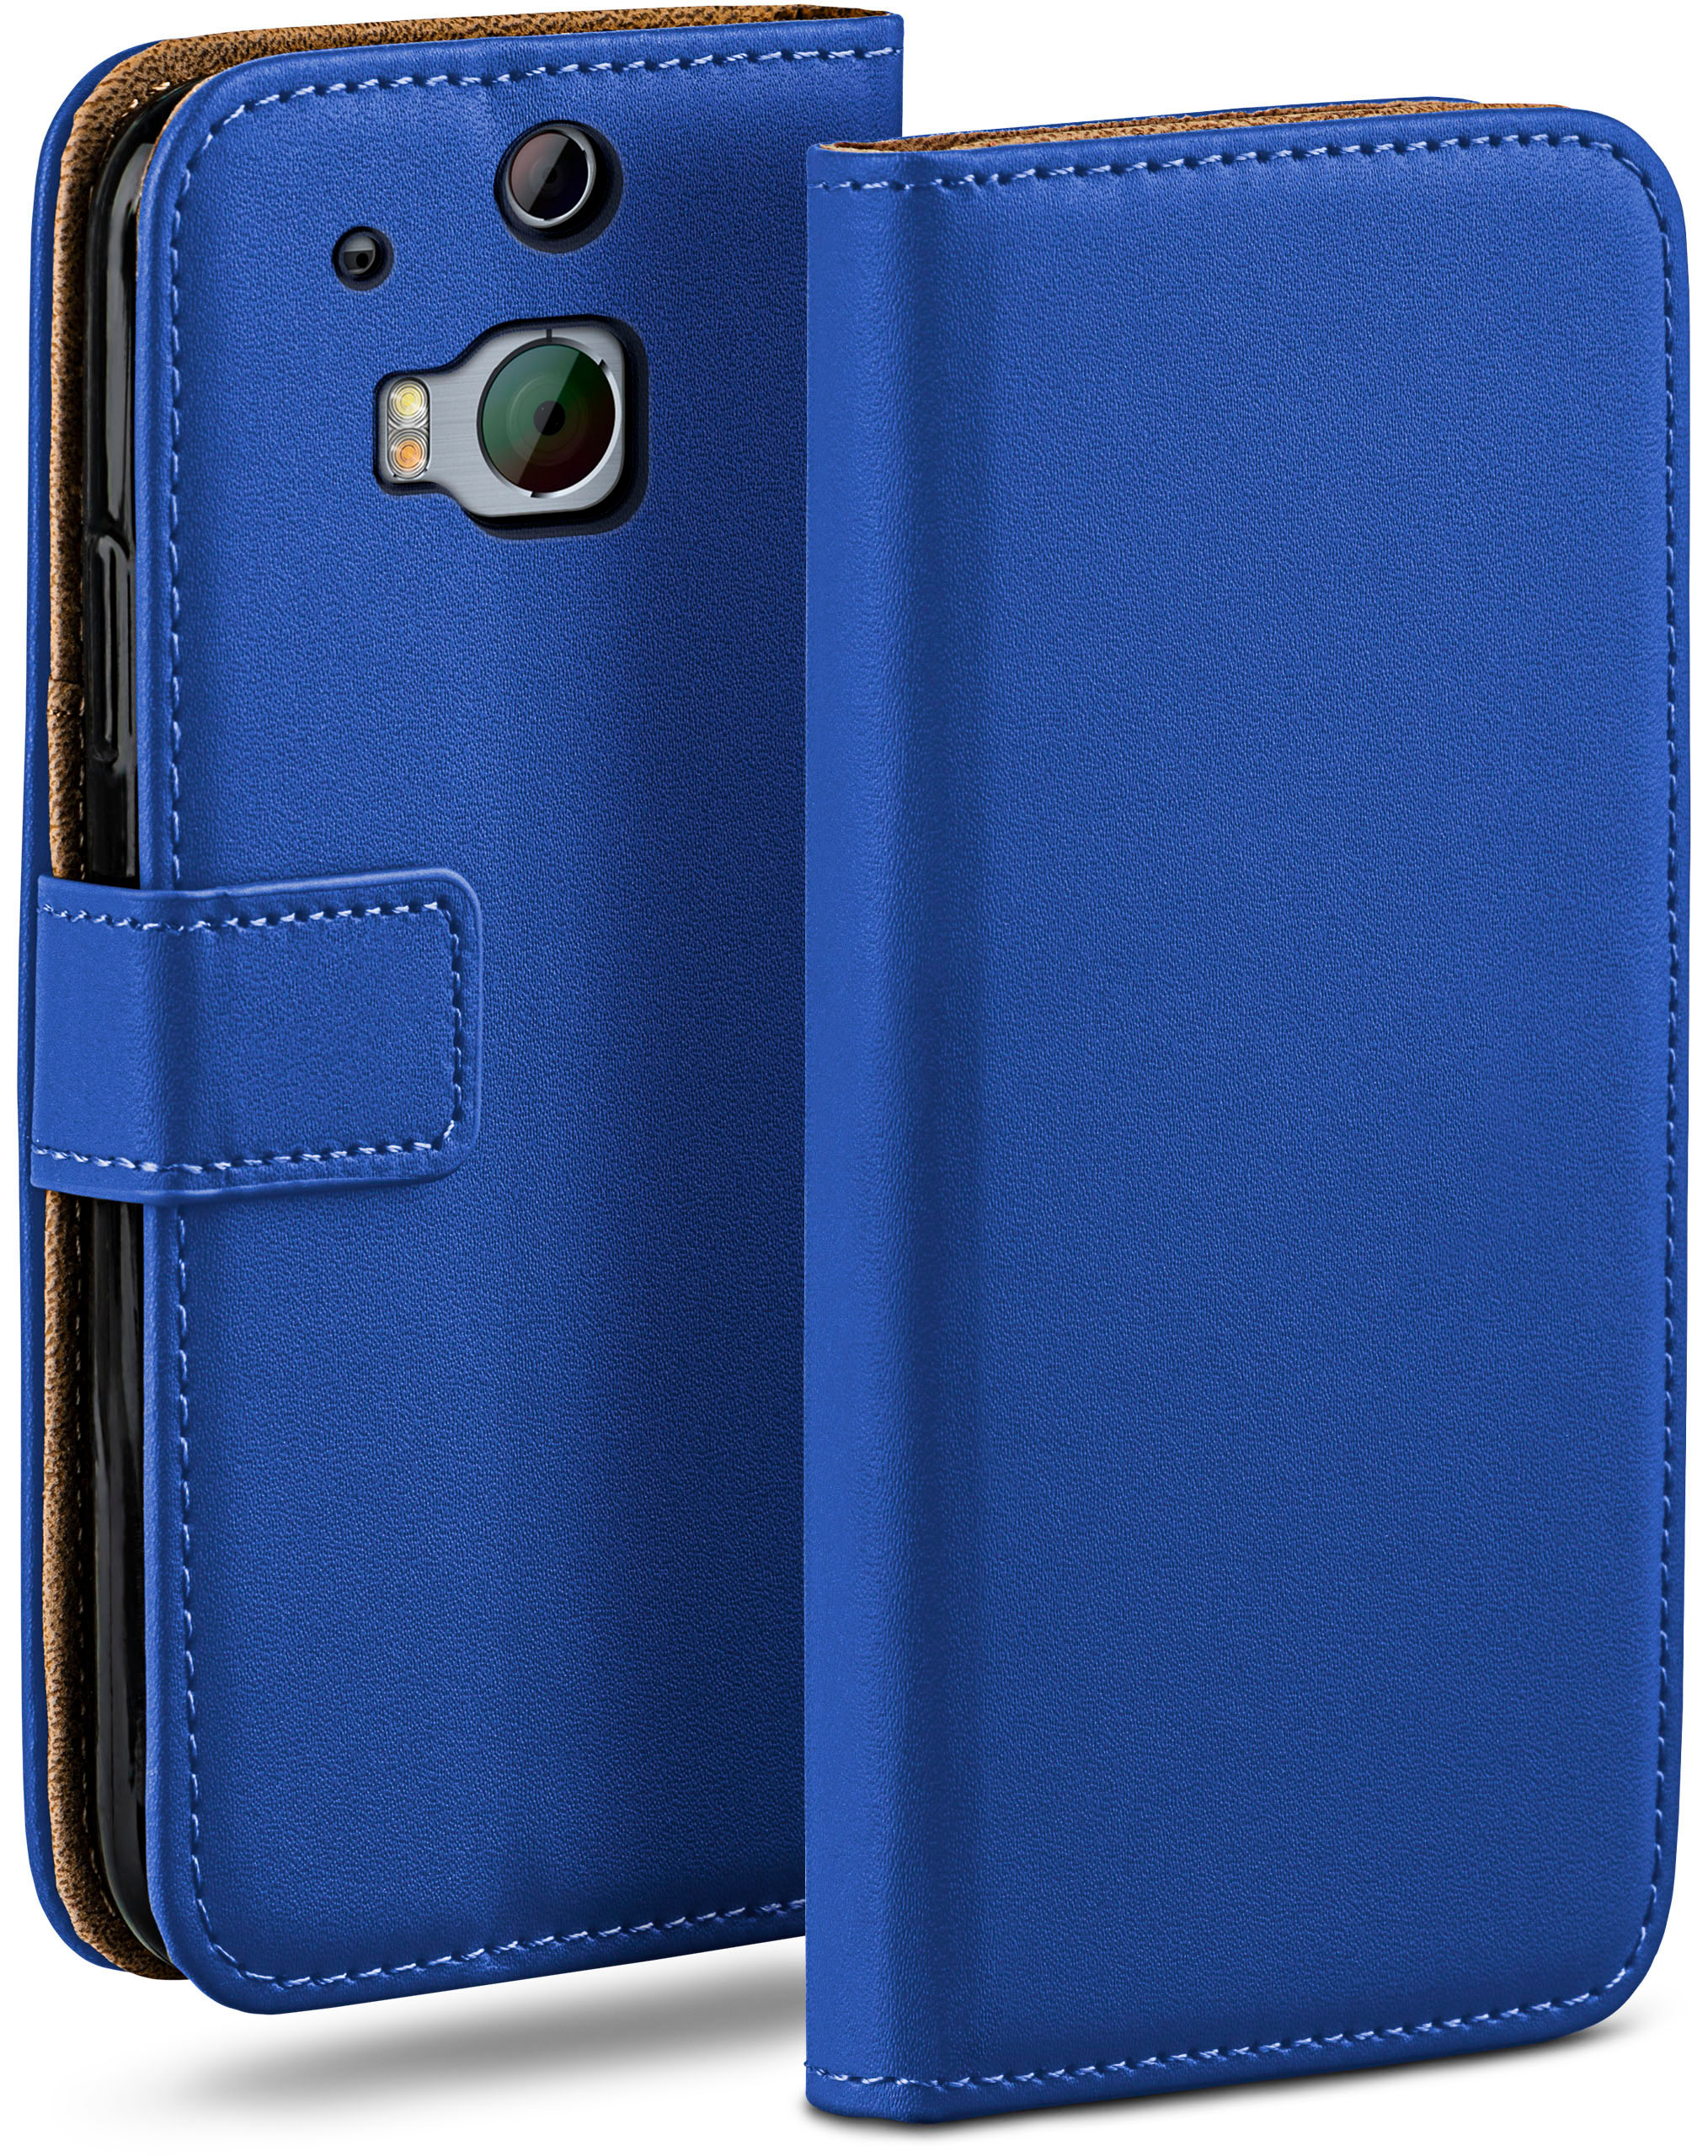 MOEX M8s, Case, One Royal-Blue Book M8 / Bookcover, HTC,